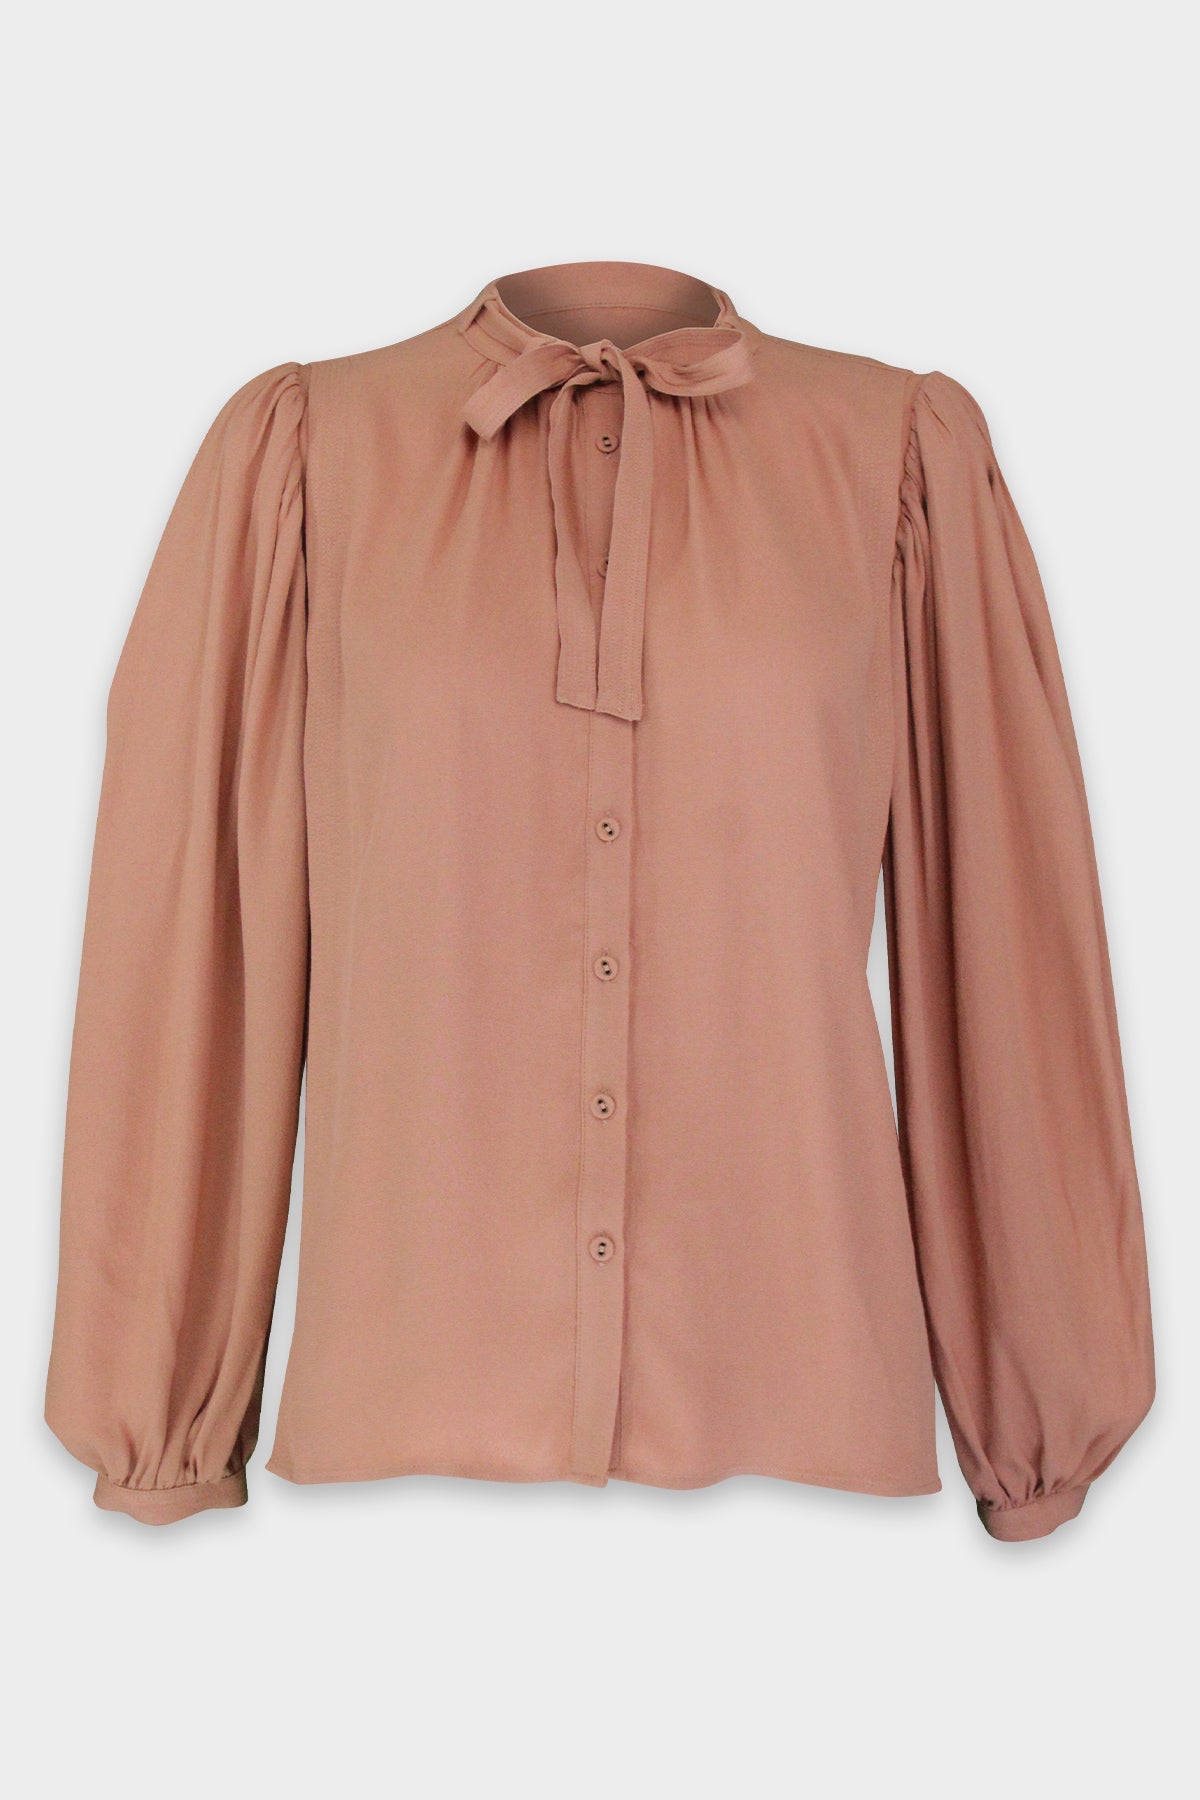 Clemens Blouse in Fawn - shop-olivia.com